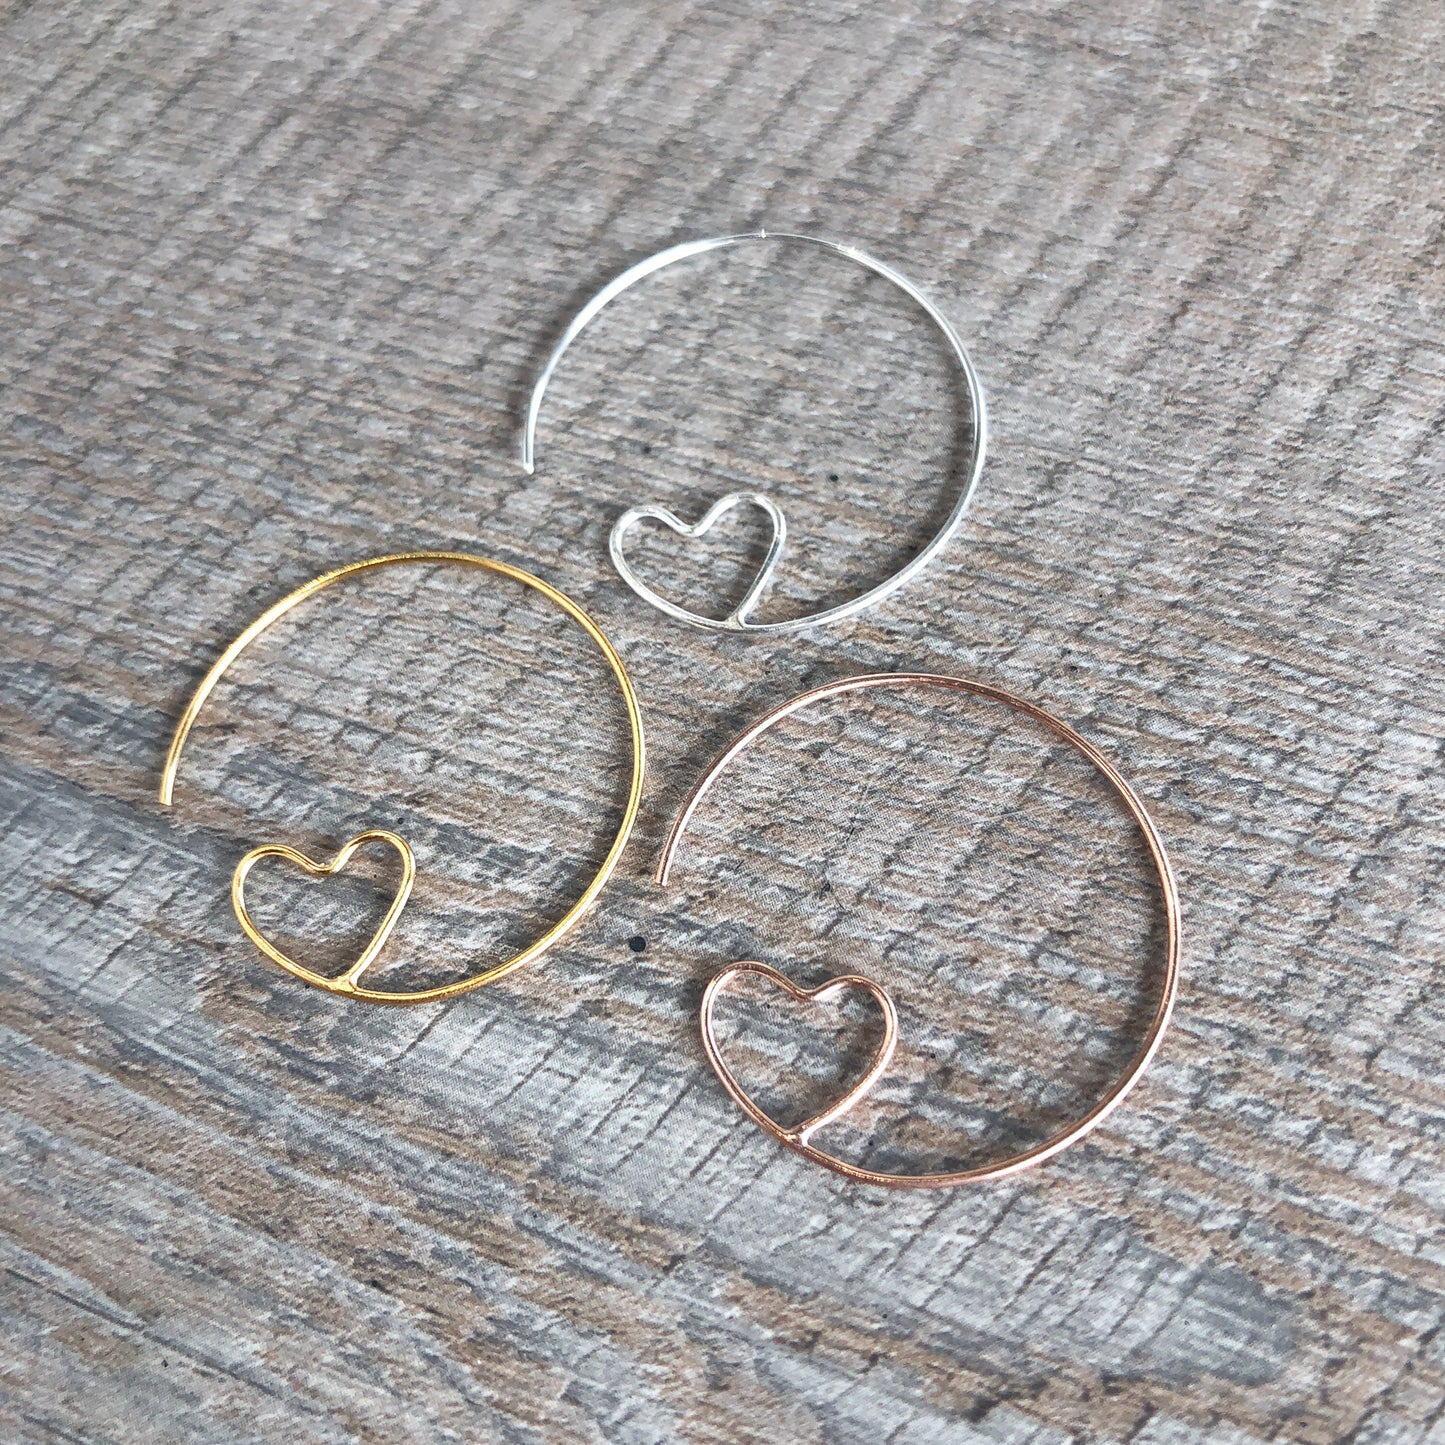 Heart Hoops - A Bead Gallery Exclusive!